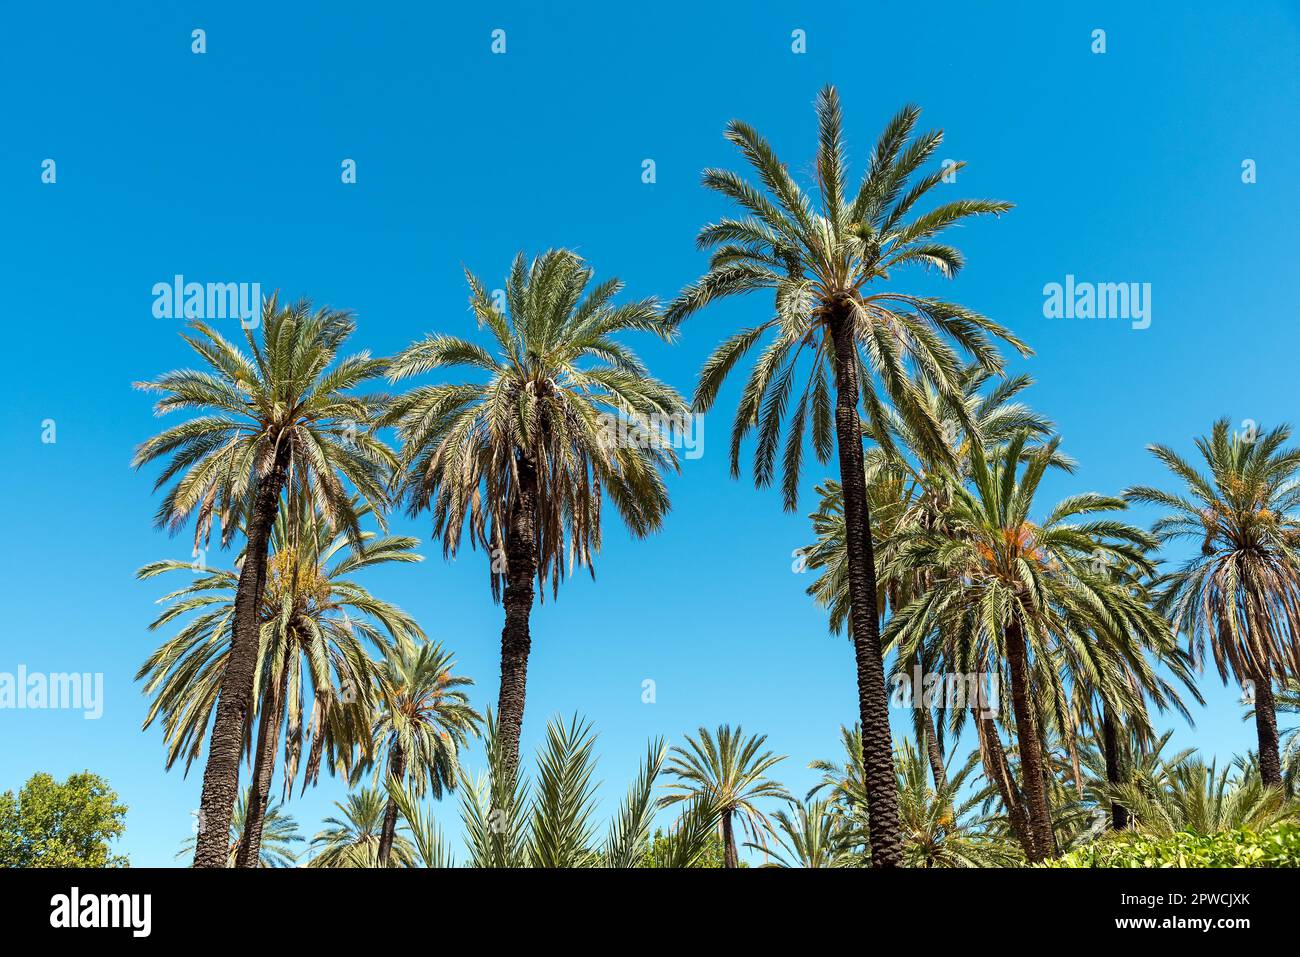 Palm trees against a blue sky seen in the tropics Stock Photo